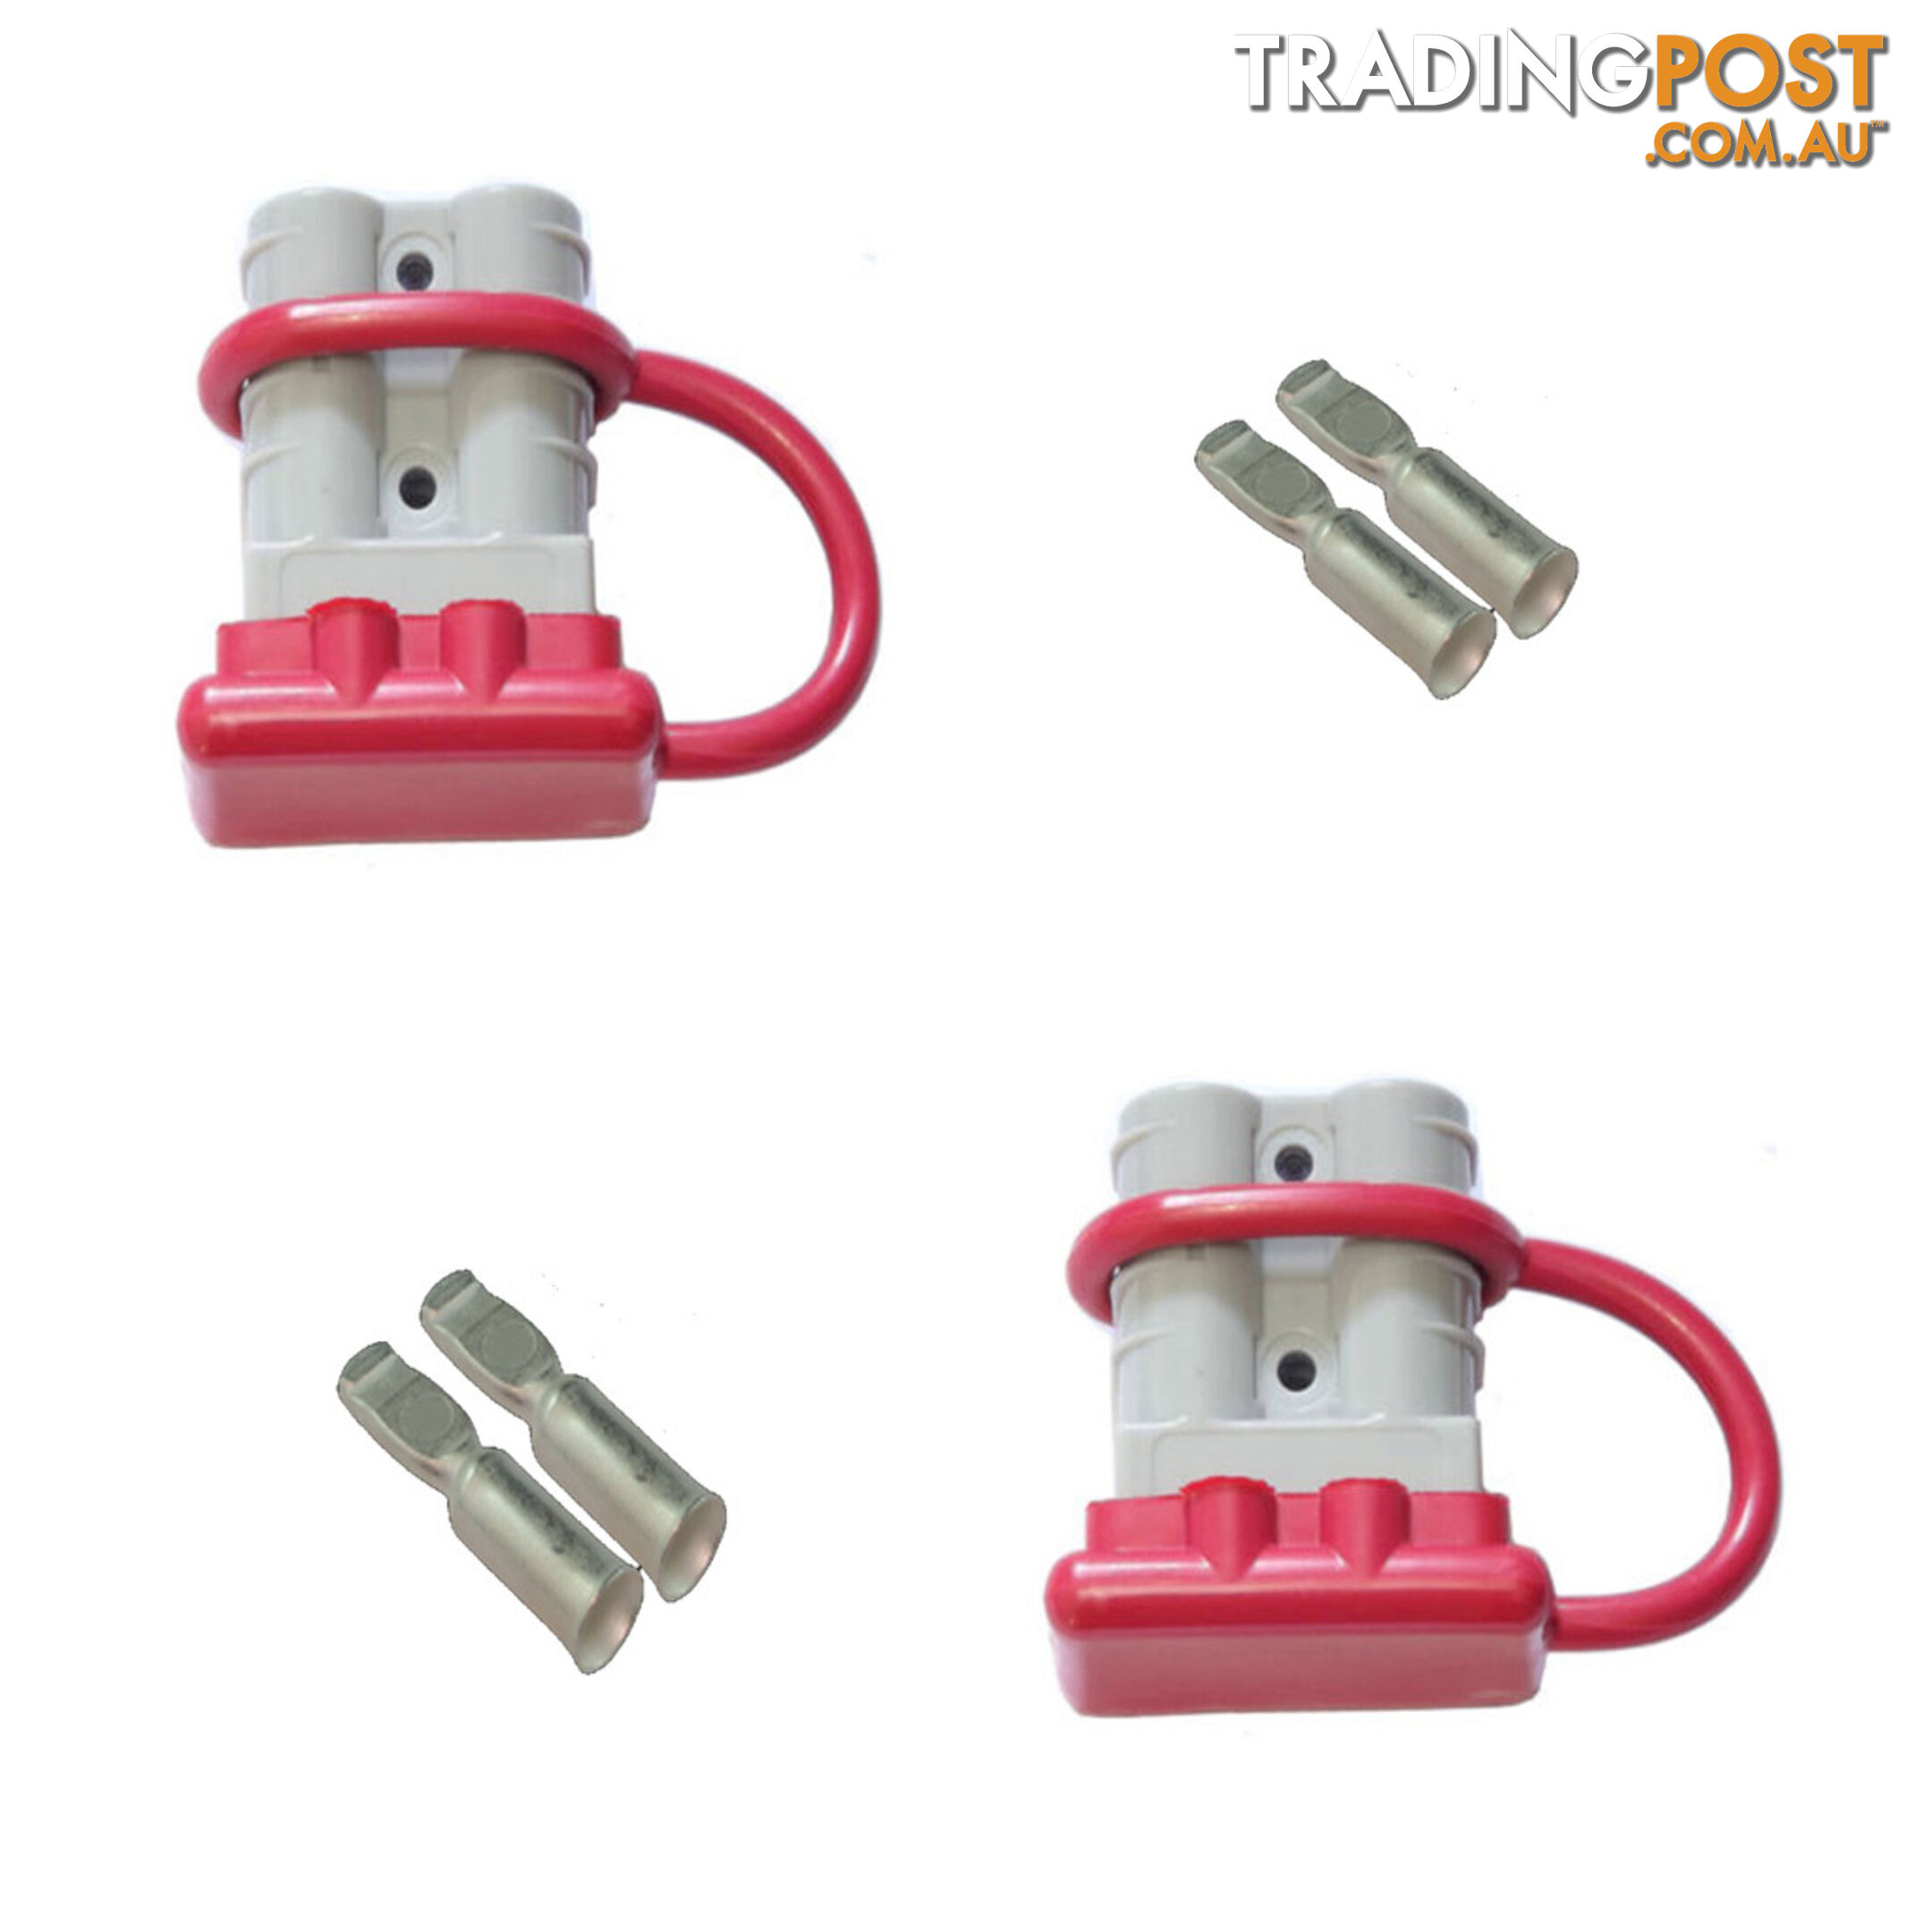 2 x 50 amp Anderson Plugs and Red Dust Covers SKU - BB-50ampAndRedCapx2